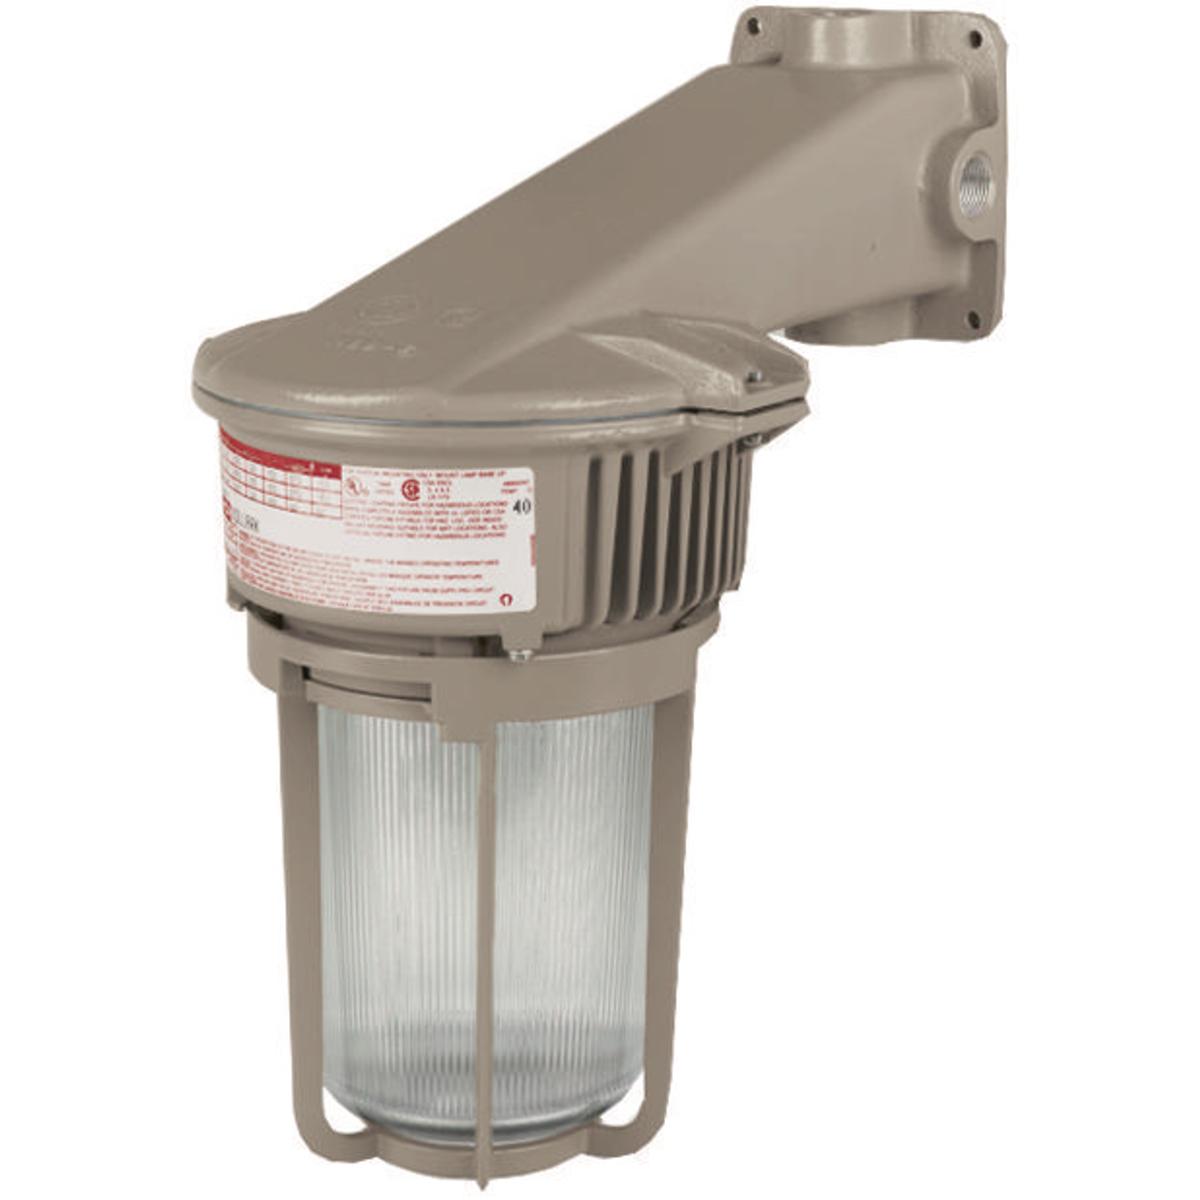 Hubbell MBF261-GGB2 26w Bi-Pin Fluorescent 120V 3/4" Wall Mount  with Globe and Guard  ; Ballast tank and splice box – corrosion resistant copper-free aluminum alloy ; Baked powder epoxy/polyester finish, electrostatically applied for complete, uniform corrosion protection ;